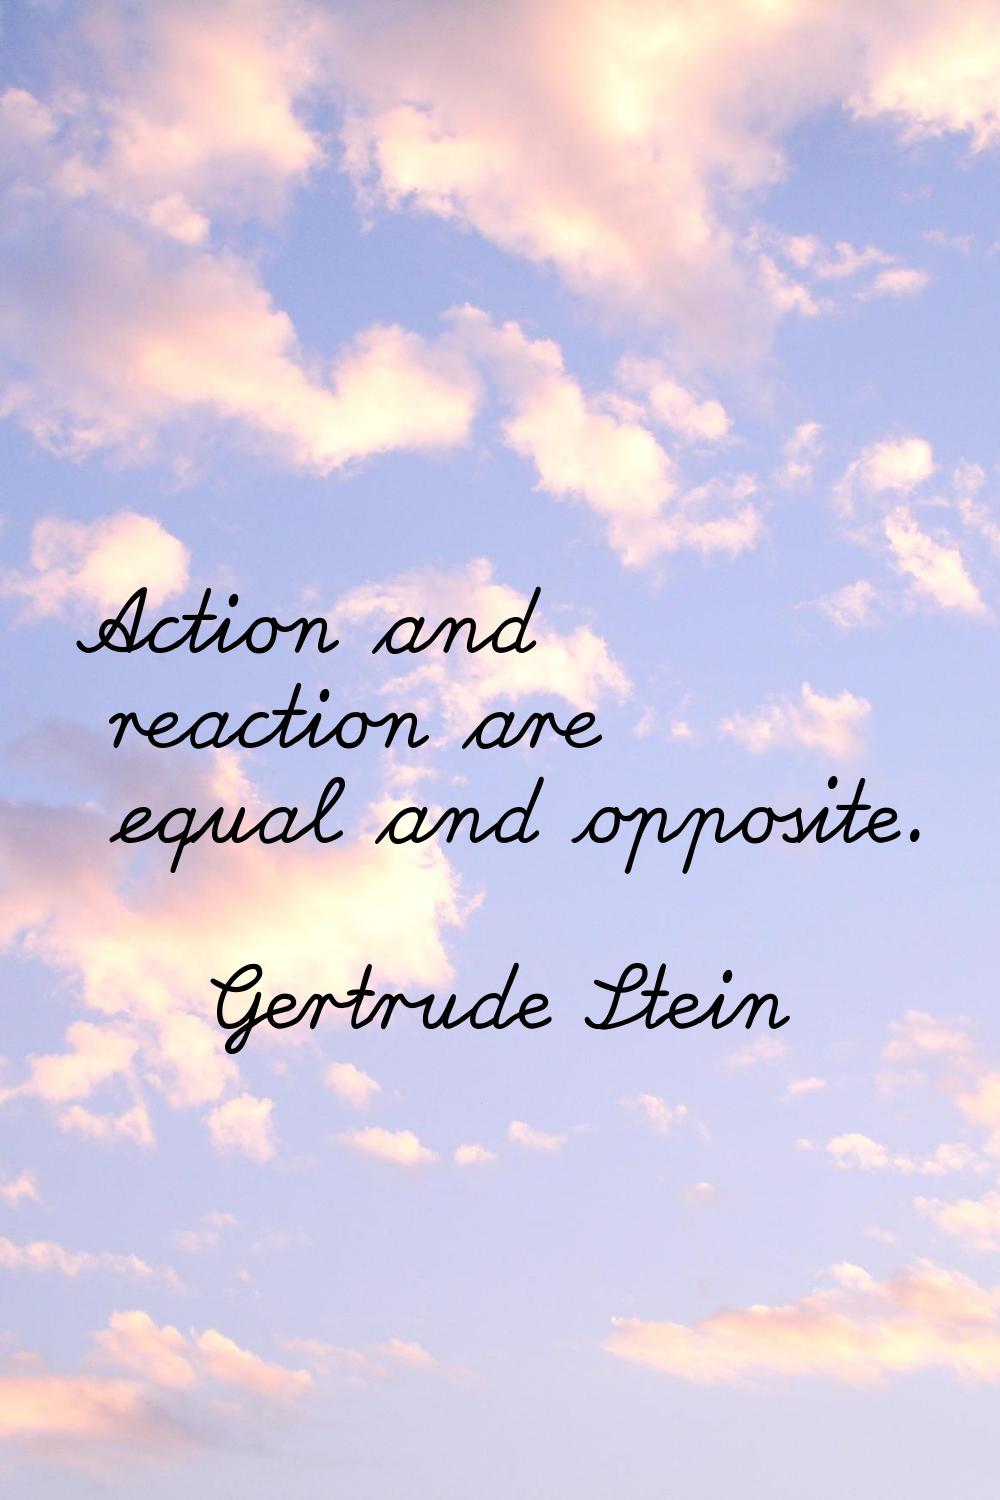 Action and reaction are equal and opposite.